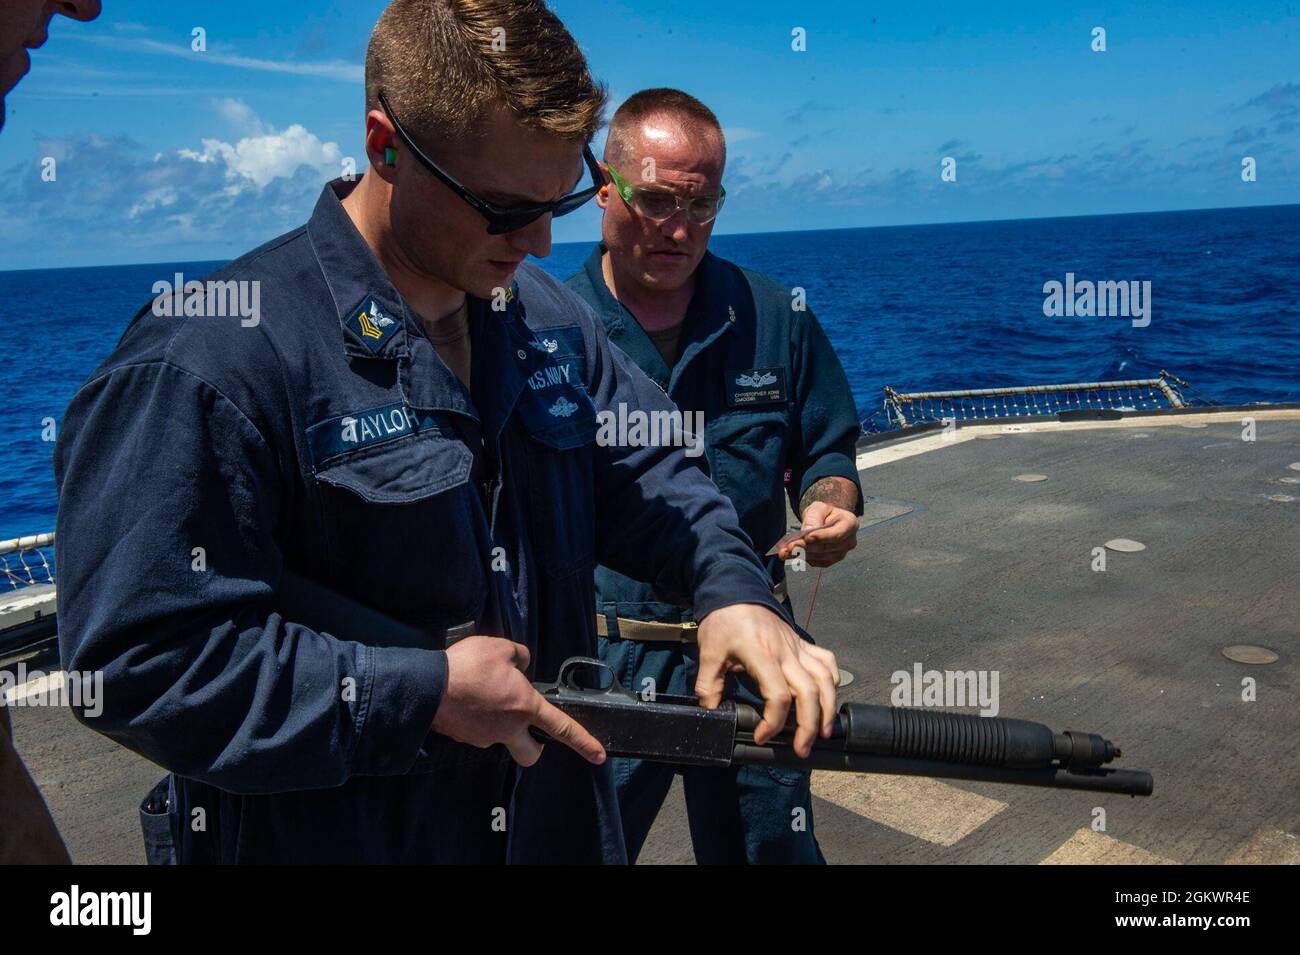 210712-N-RG587-1407 ATLANTIC OCEAN (July 12, 2021) Electronics Technician 1st Class Jason Taylor, loads an M500 shotgun aboard the Ticonderoga-class guided-missile cruiser USS Vella Gulf (CG 72), during a small arms qualification course in the Atlantic Ocean, July 12. Vella Gulf is underway in the Atlantic Ocean conducting operations as part of the Dwight D. Eisenhower Carrier Strike Group. Stock Photo